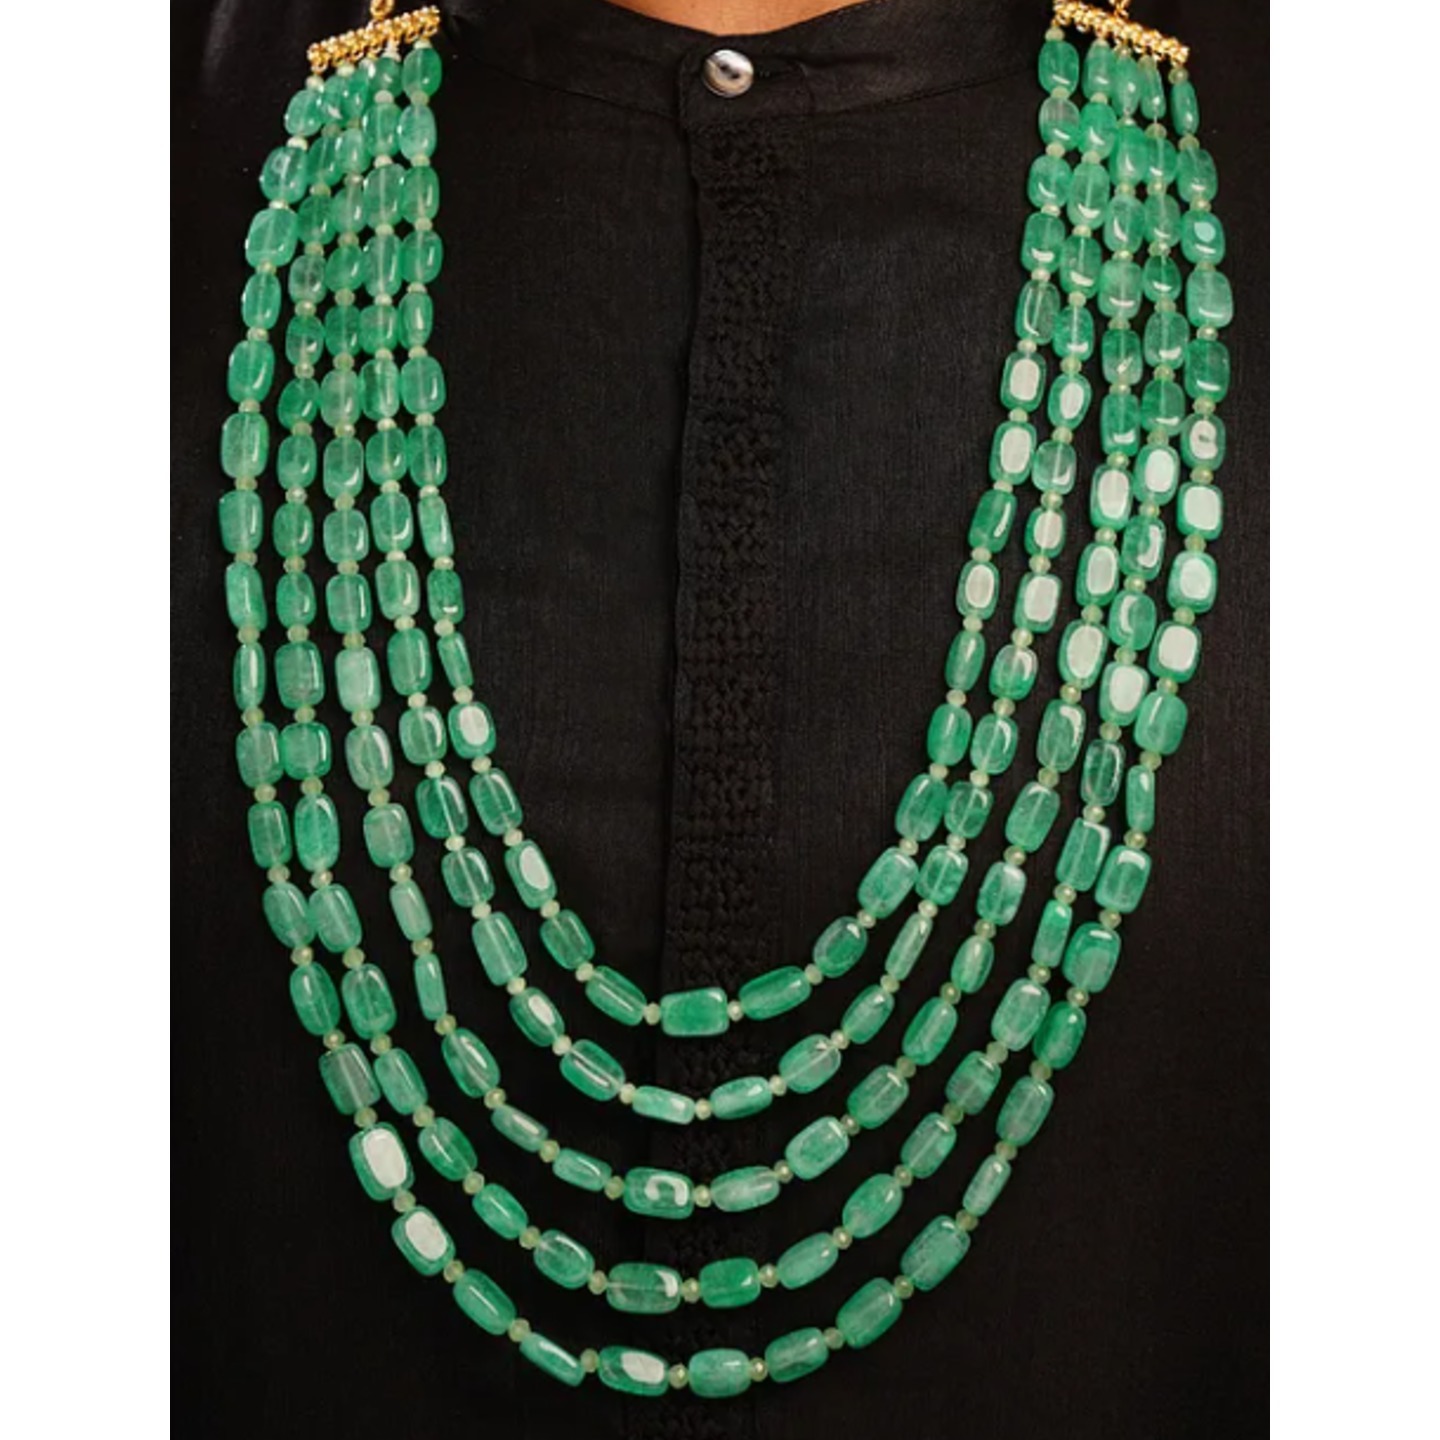 Green Beaded Layered Necklace For Men